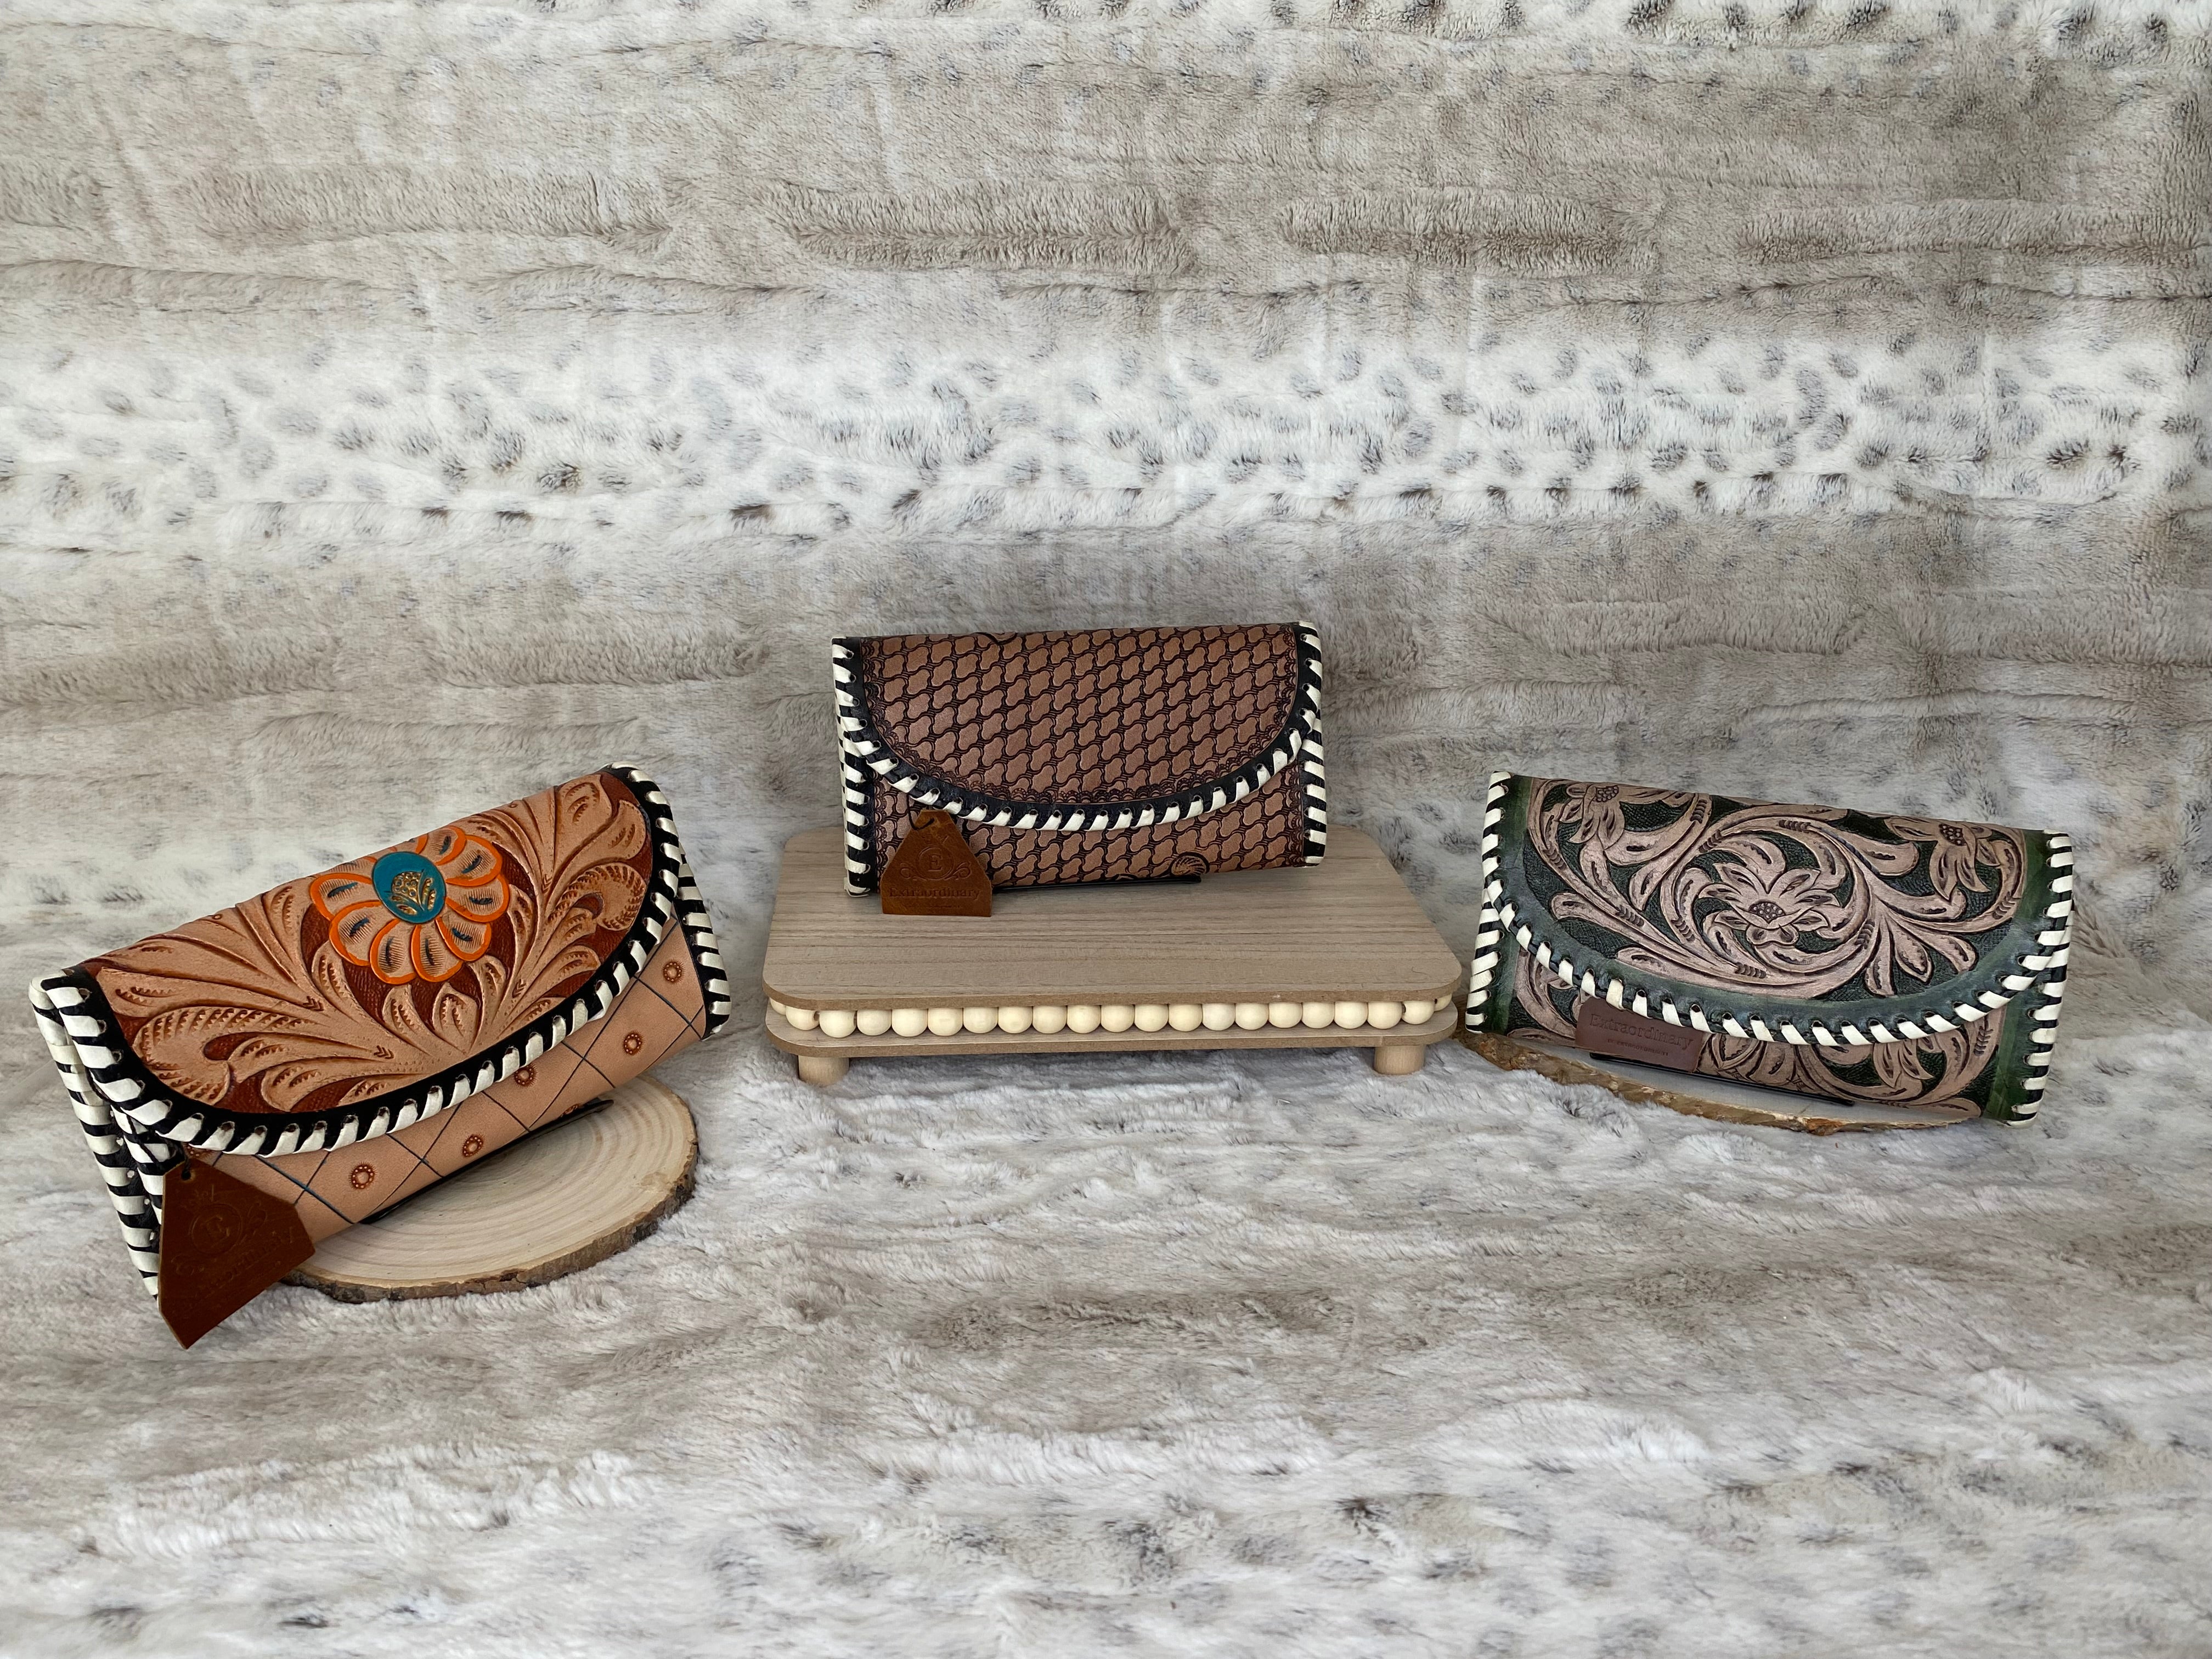 Handmade Tooled Leather Wallet Women Carved Leather Wallet Embossed Leather Wallet